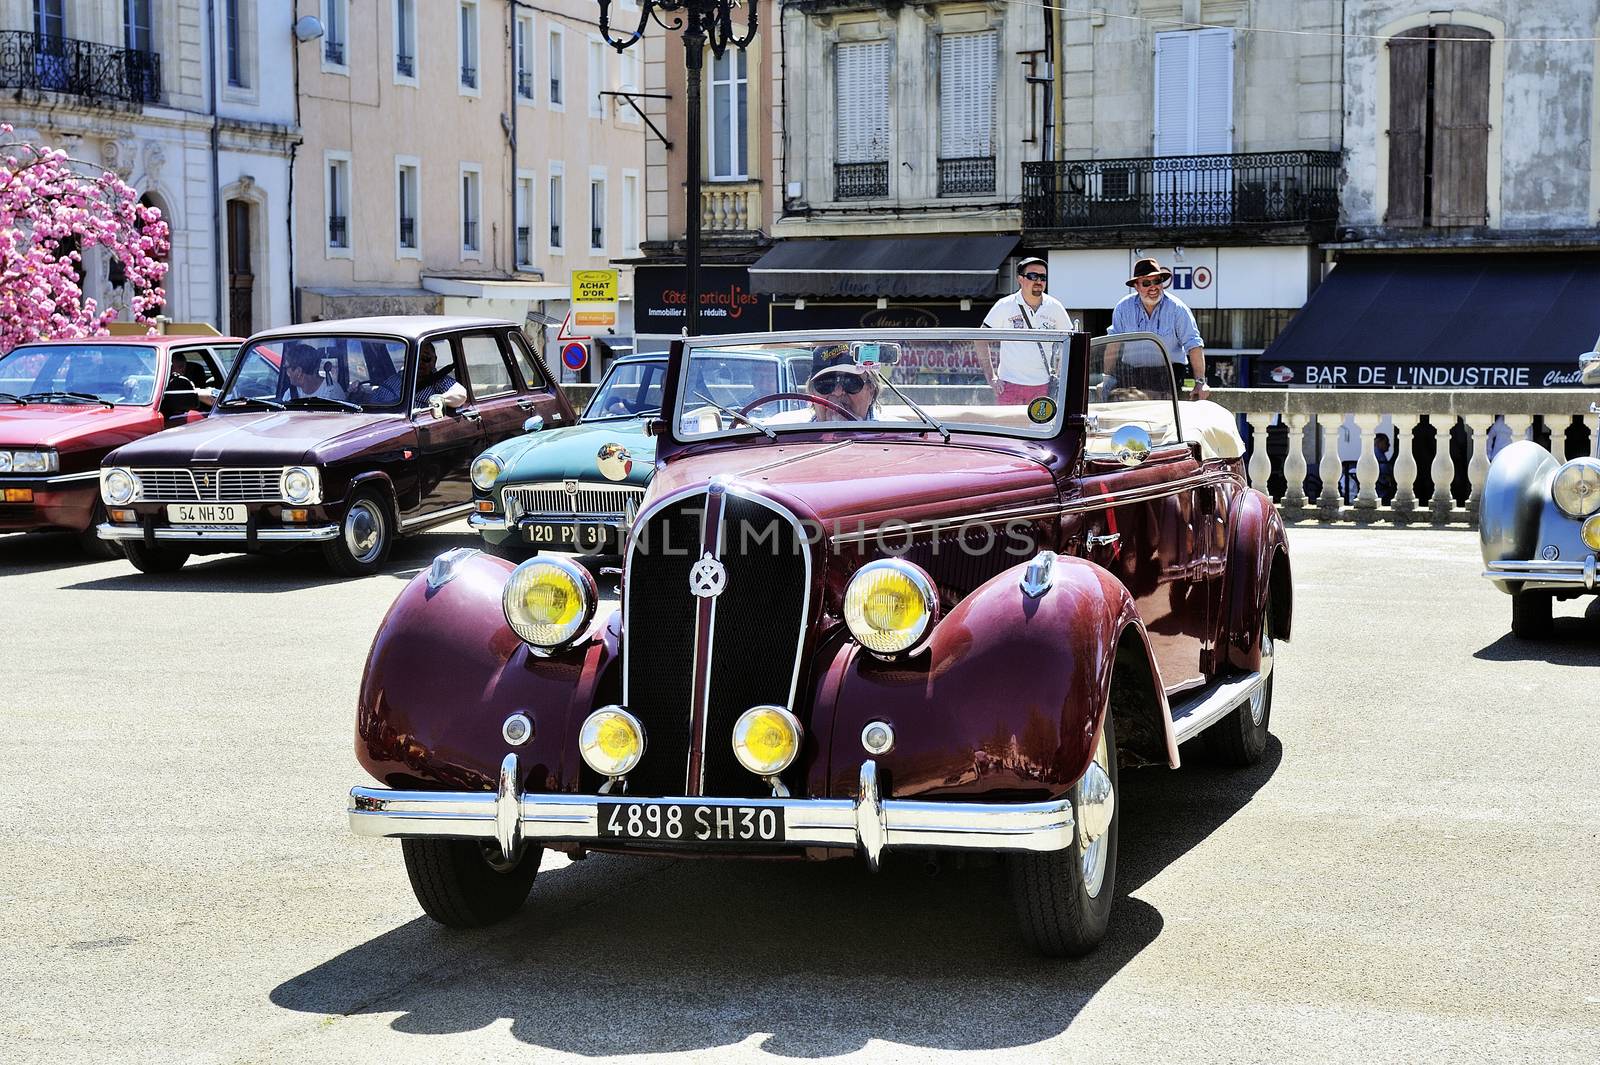 Hotchkiss Artois the years 1948 photographed the rally of vintage cars Town Hall Square in the town of Ales, in the Gard department